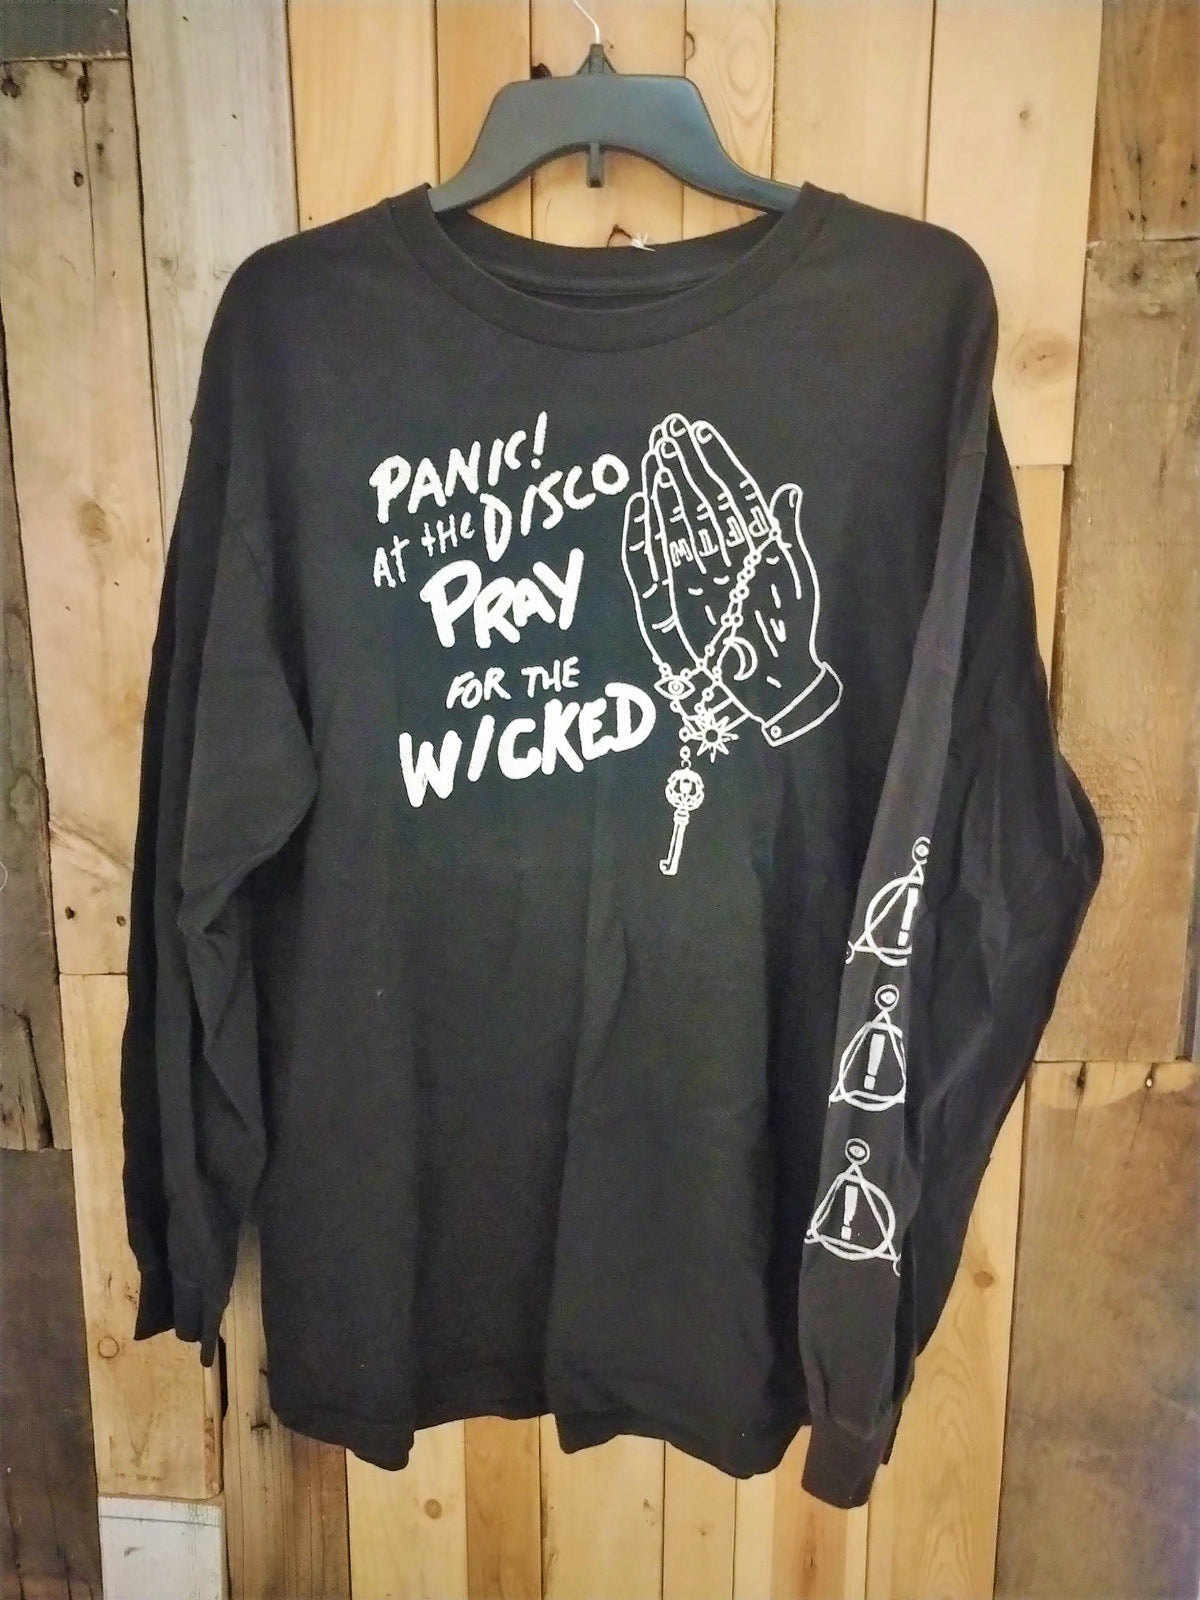 Panic At The Disco Long Sleeve "Pray for the Wicked" Tour T Shirt Size Large 803211WH